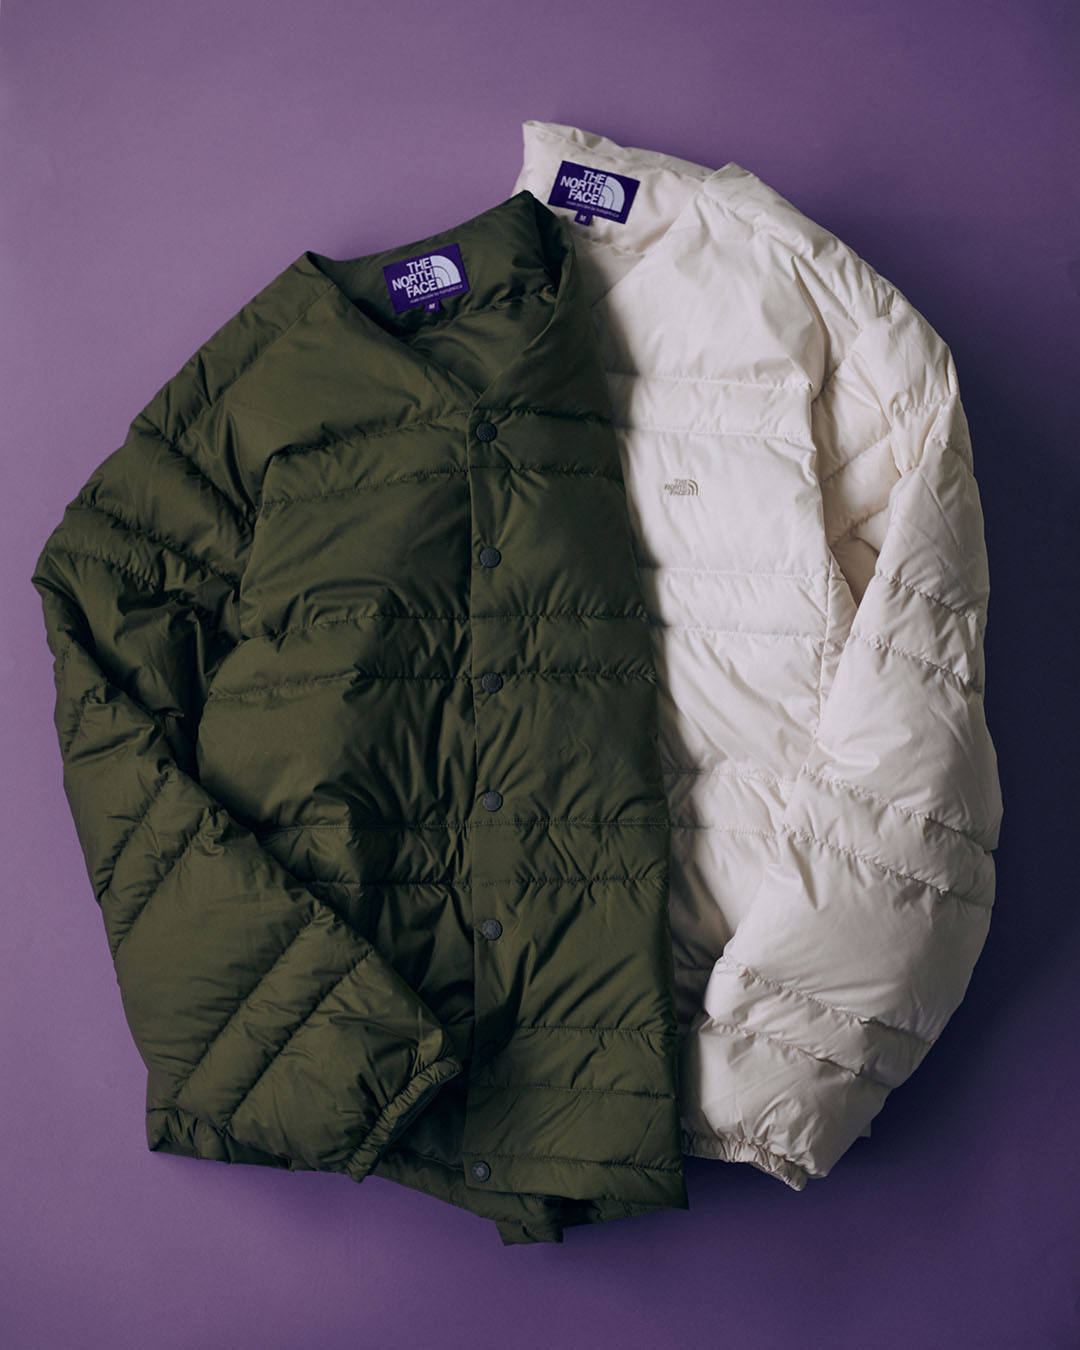 nanamica / THE NORTH FACE PURPLE LABEL / Featured Product vol.35